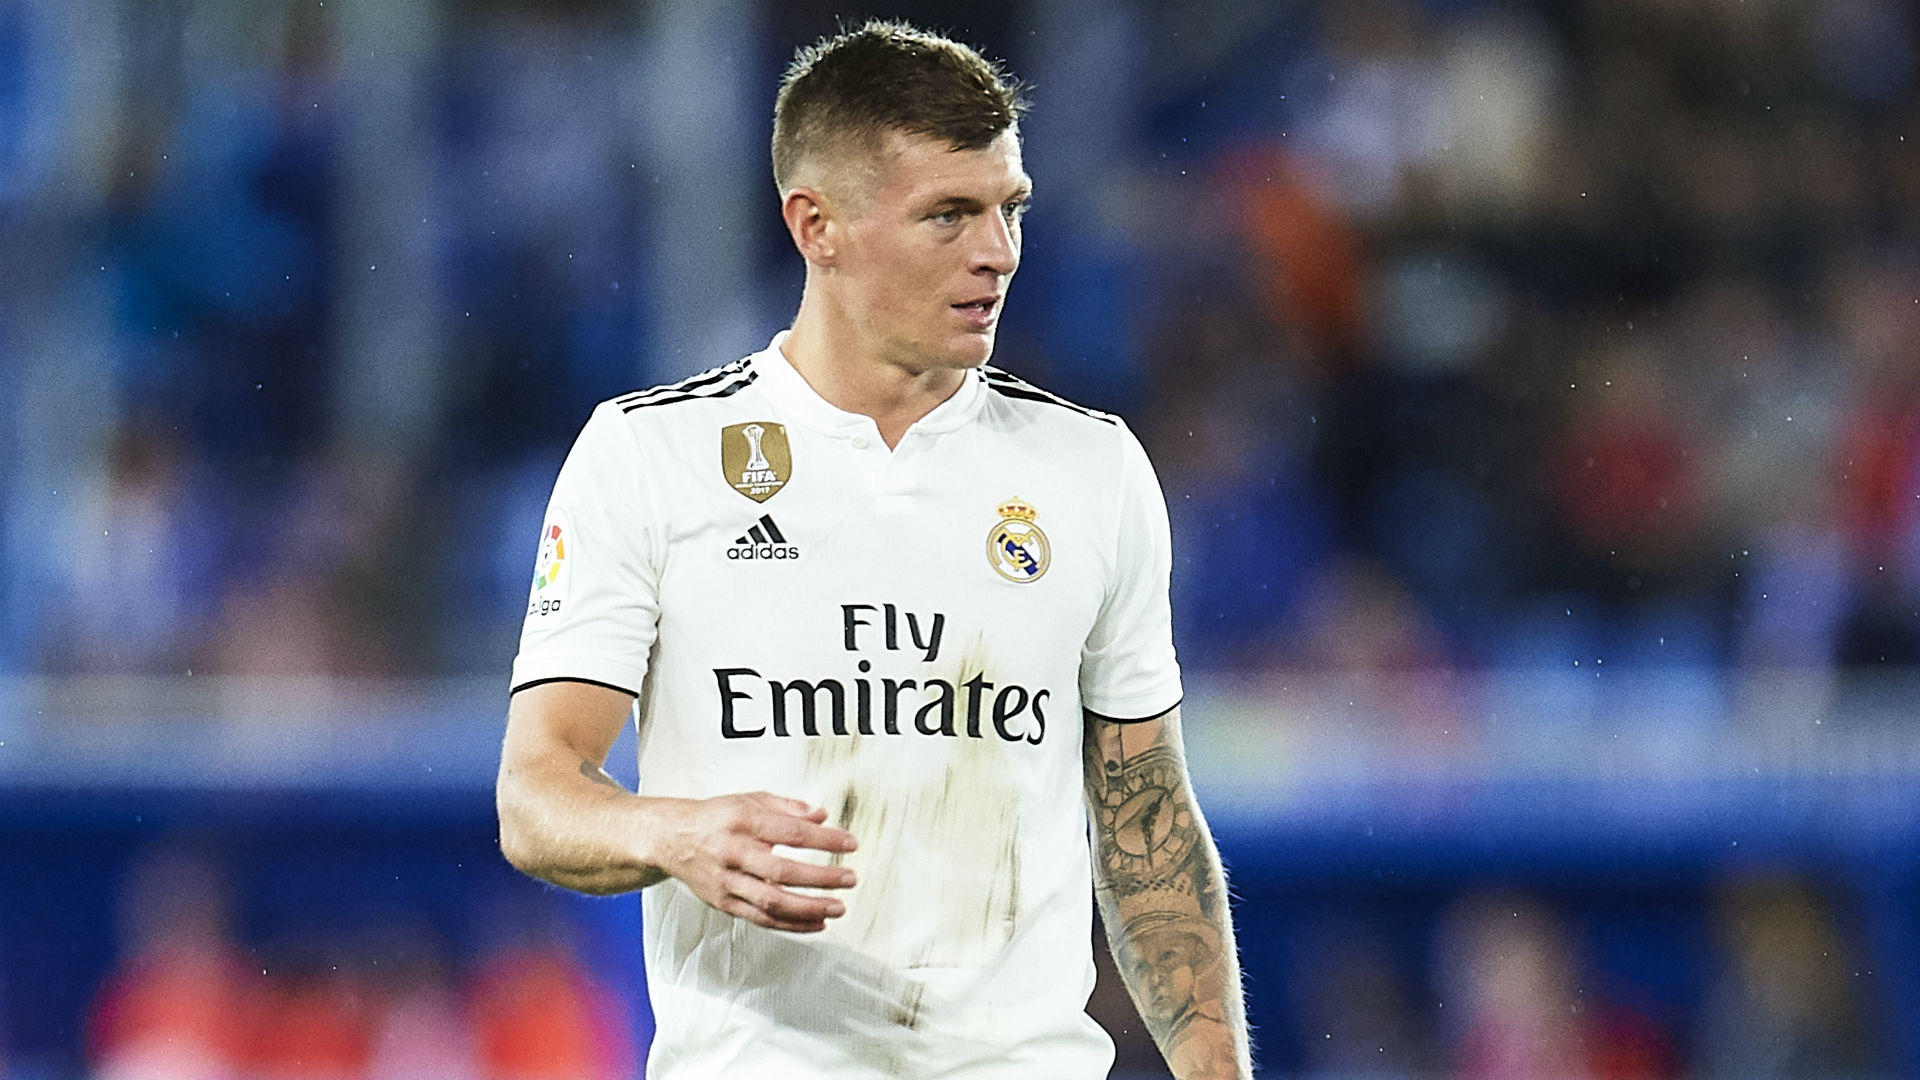 Paul Pogba has been heavily linked with Real Madrid but Toni Kroos expects to keep his place even if the Frenchman arrives.